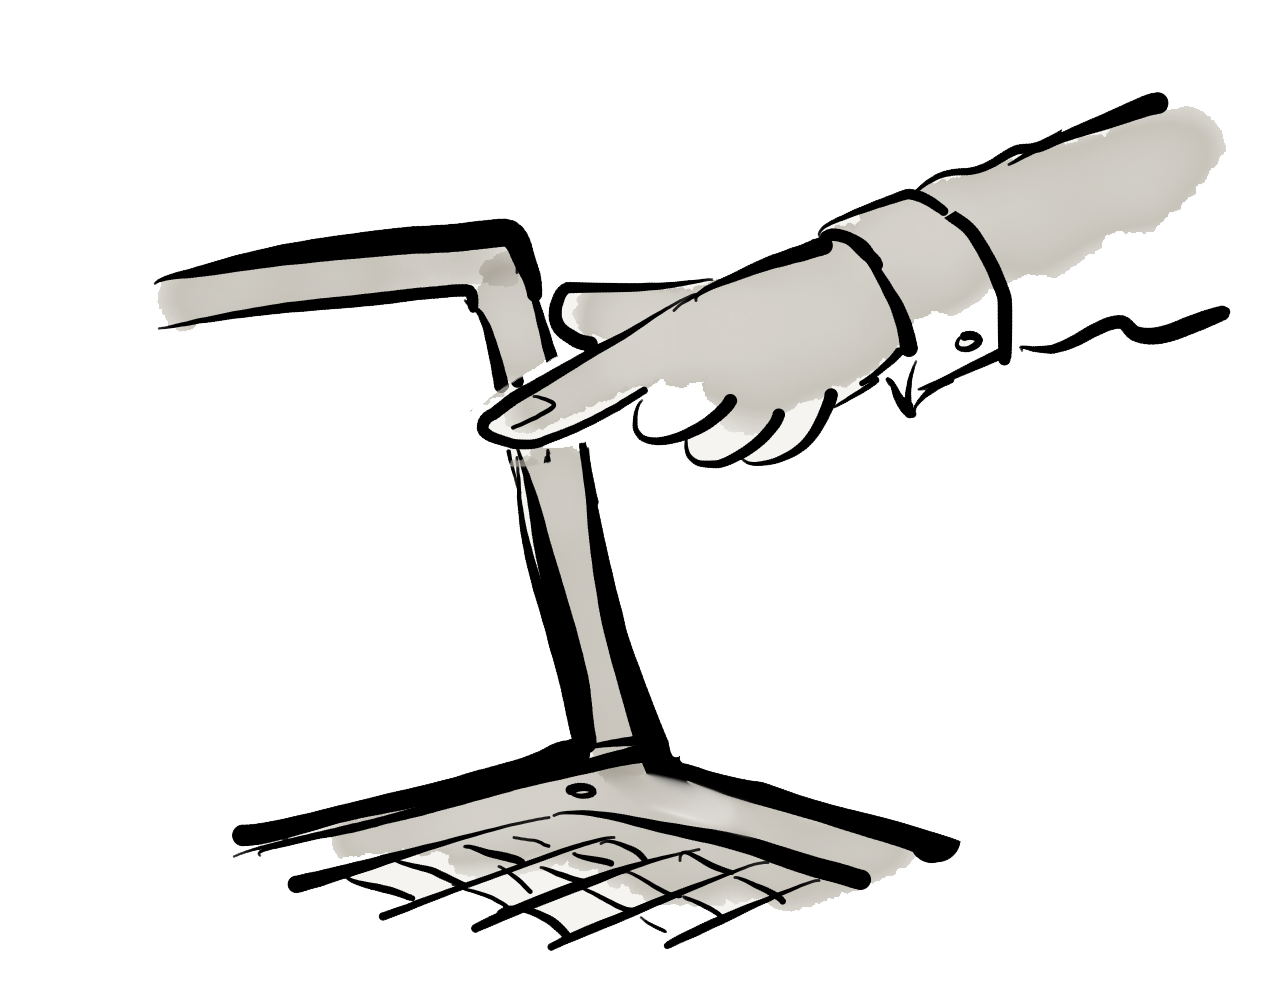 A cartoon showing a finger pointing at a laptop screen